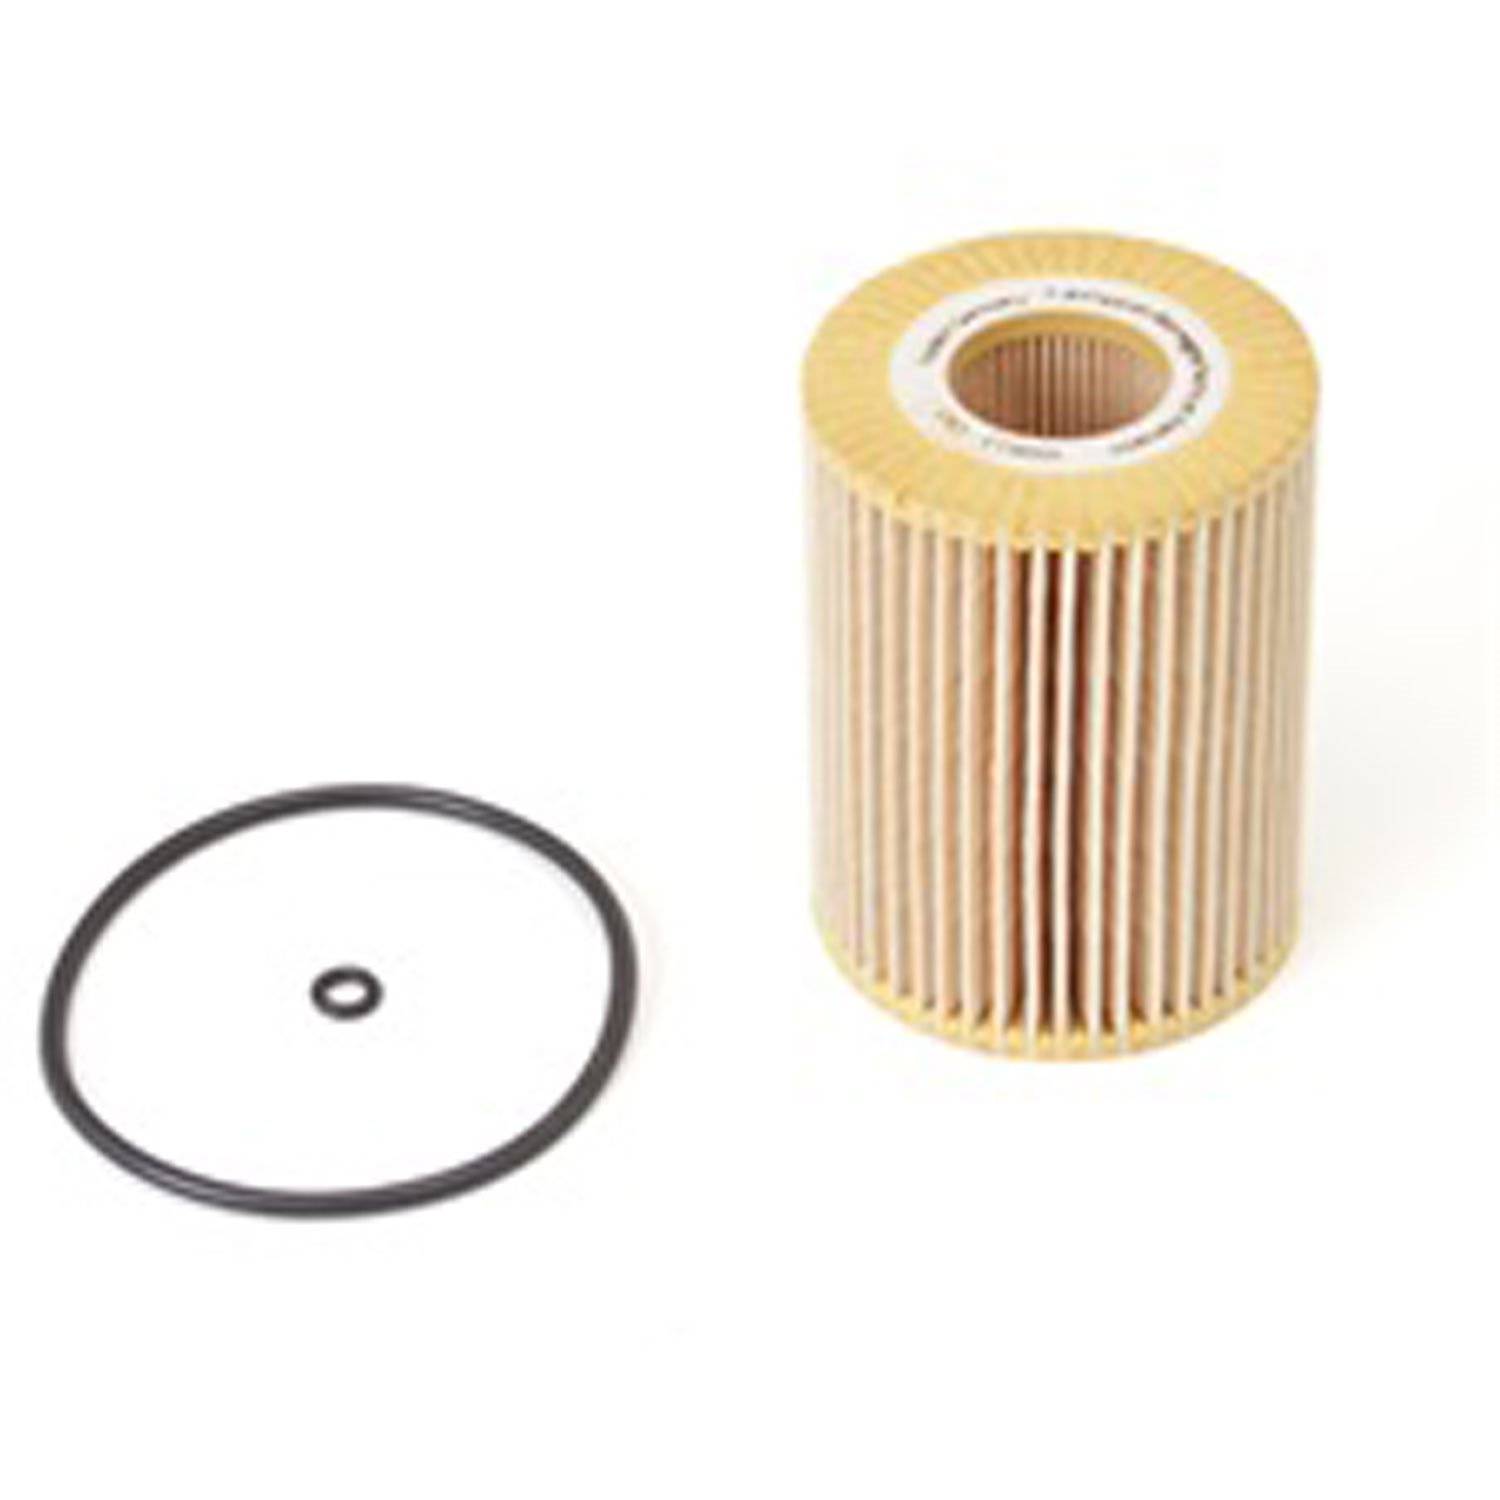 Oil Filter Jeep Grand Cherokee WK 3.0L Diesel 2005 and 2007-2011